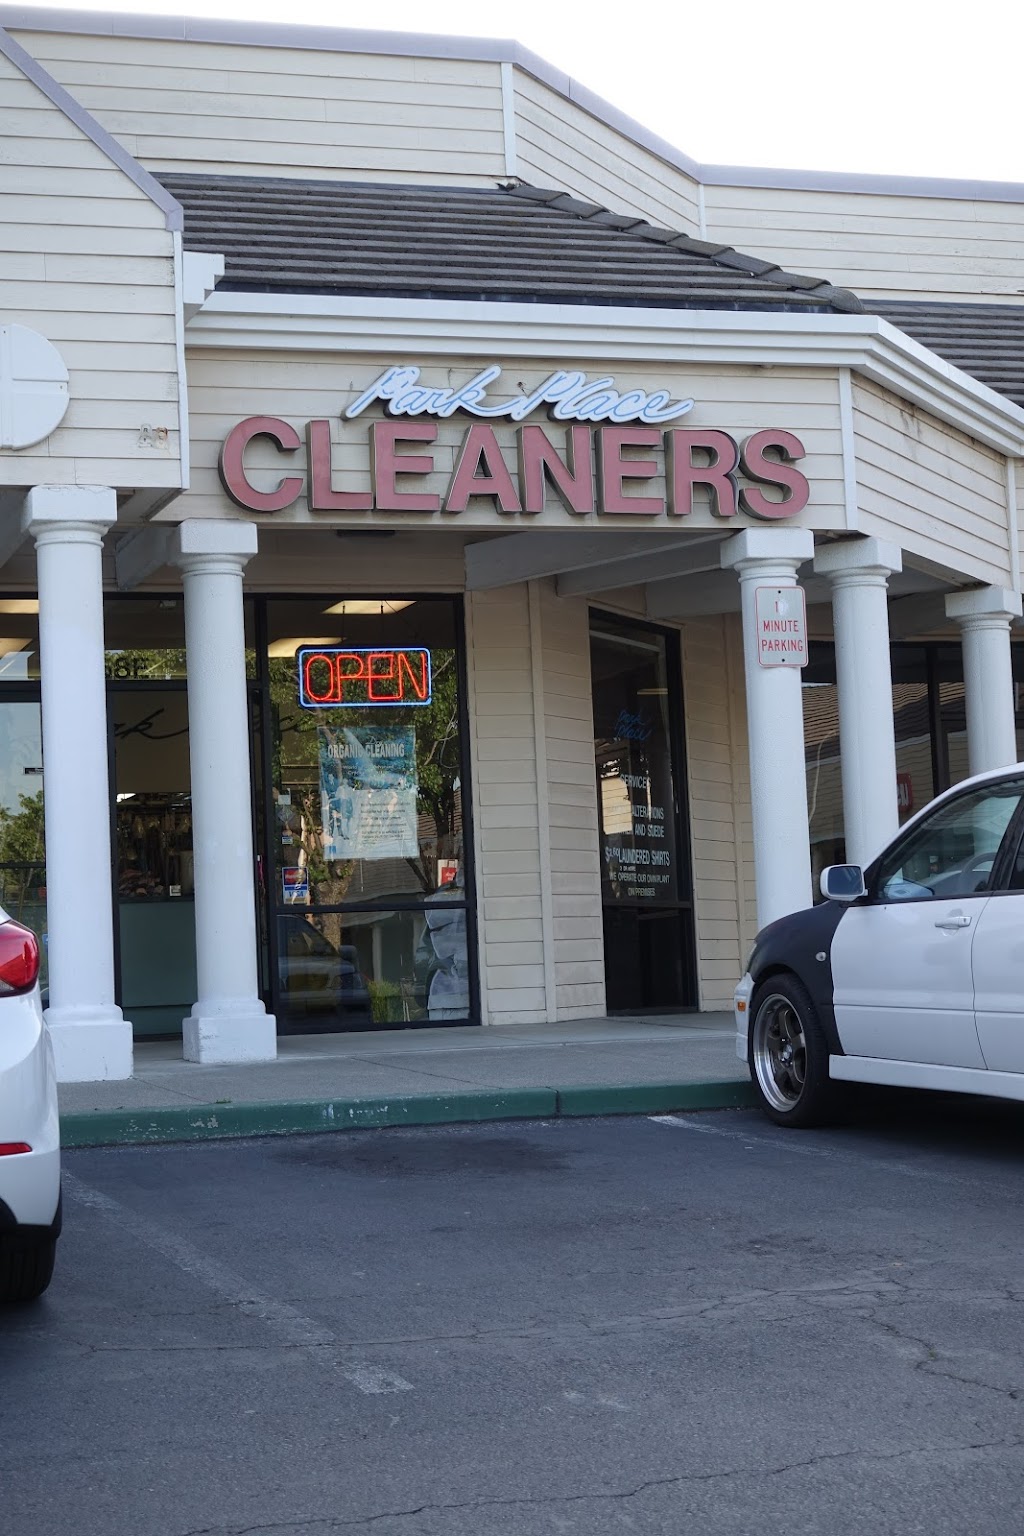 Park Place Cleaners | 258 Sunset Ave E, Suisun City, CA 94585 | Phone: (707) 427-1478